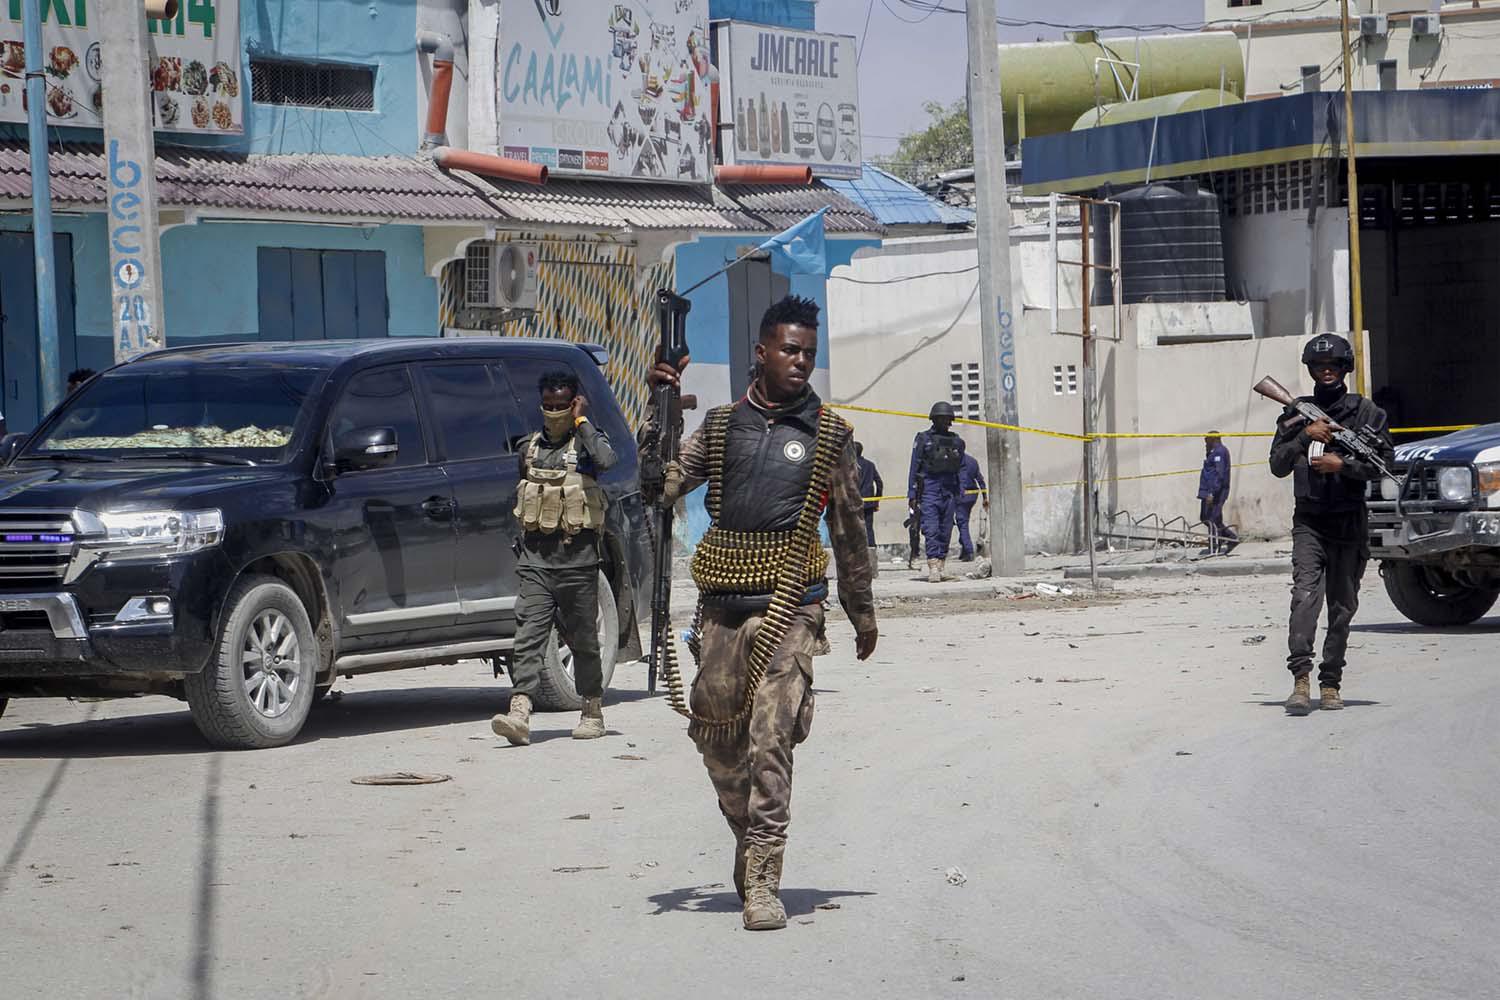 The attack was eventually repelled by Somali soldiers